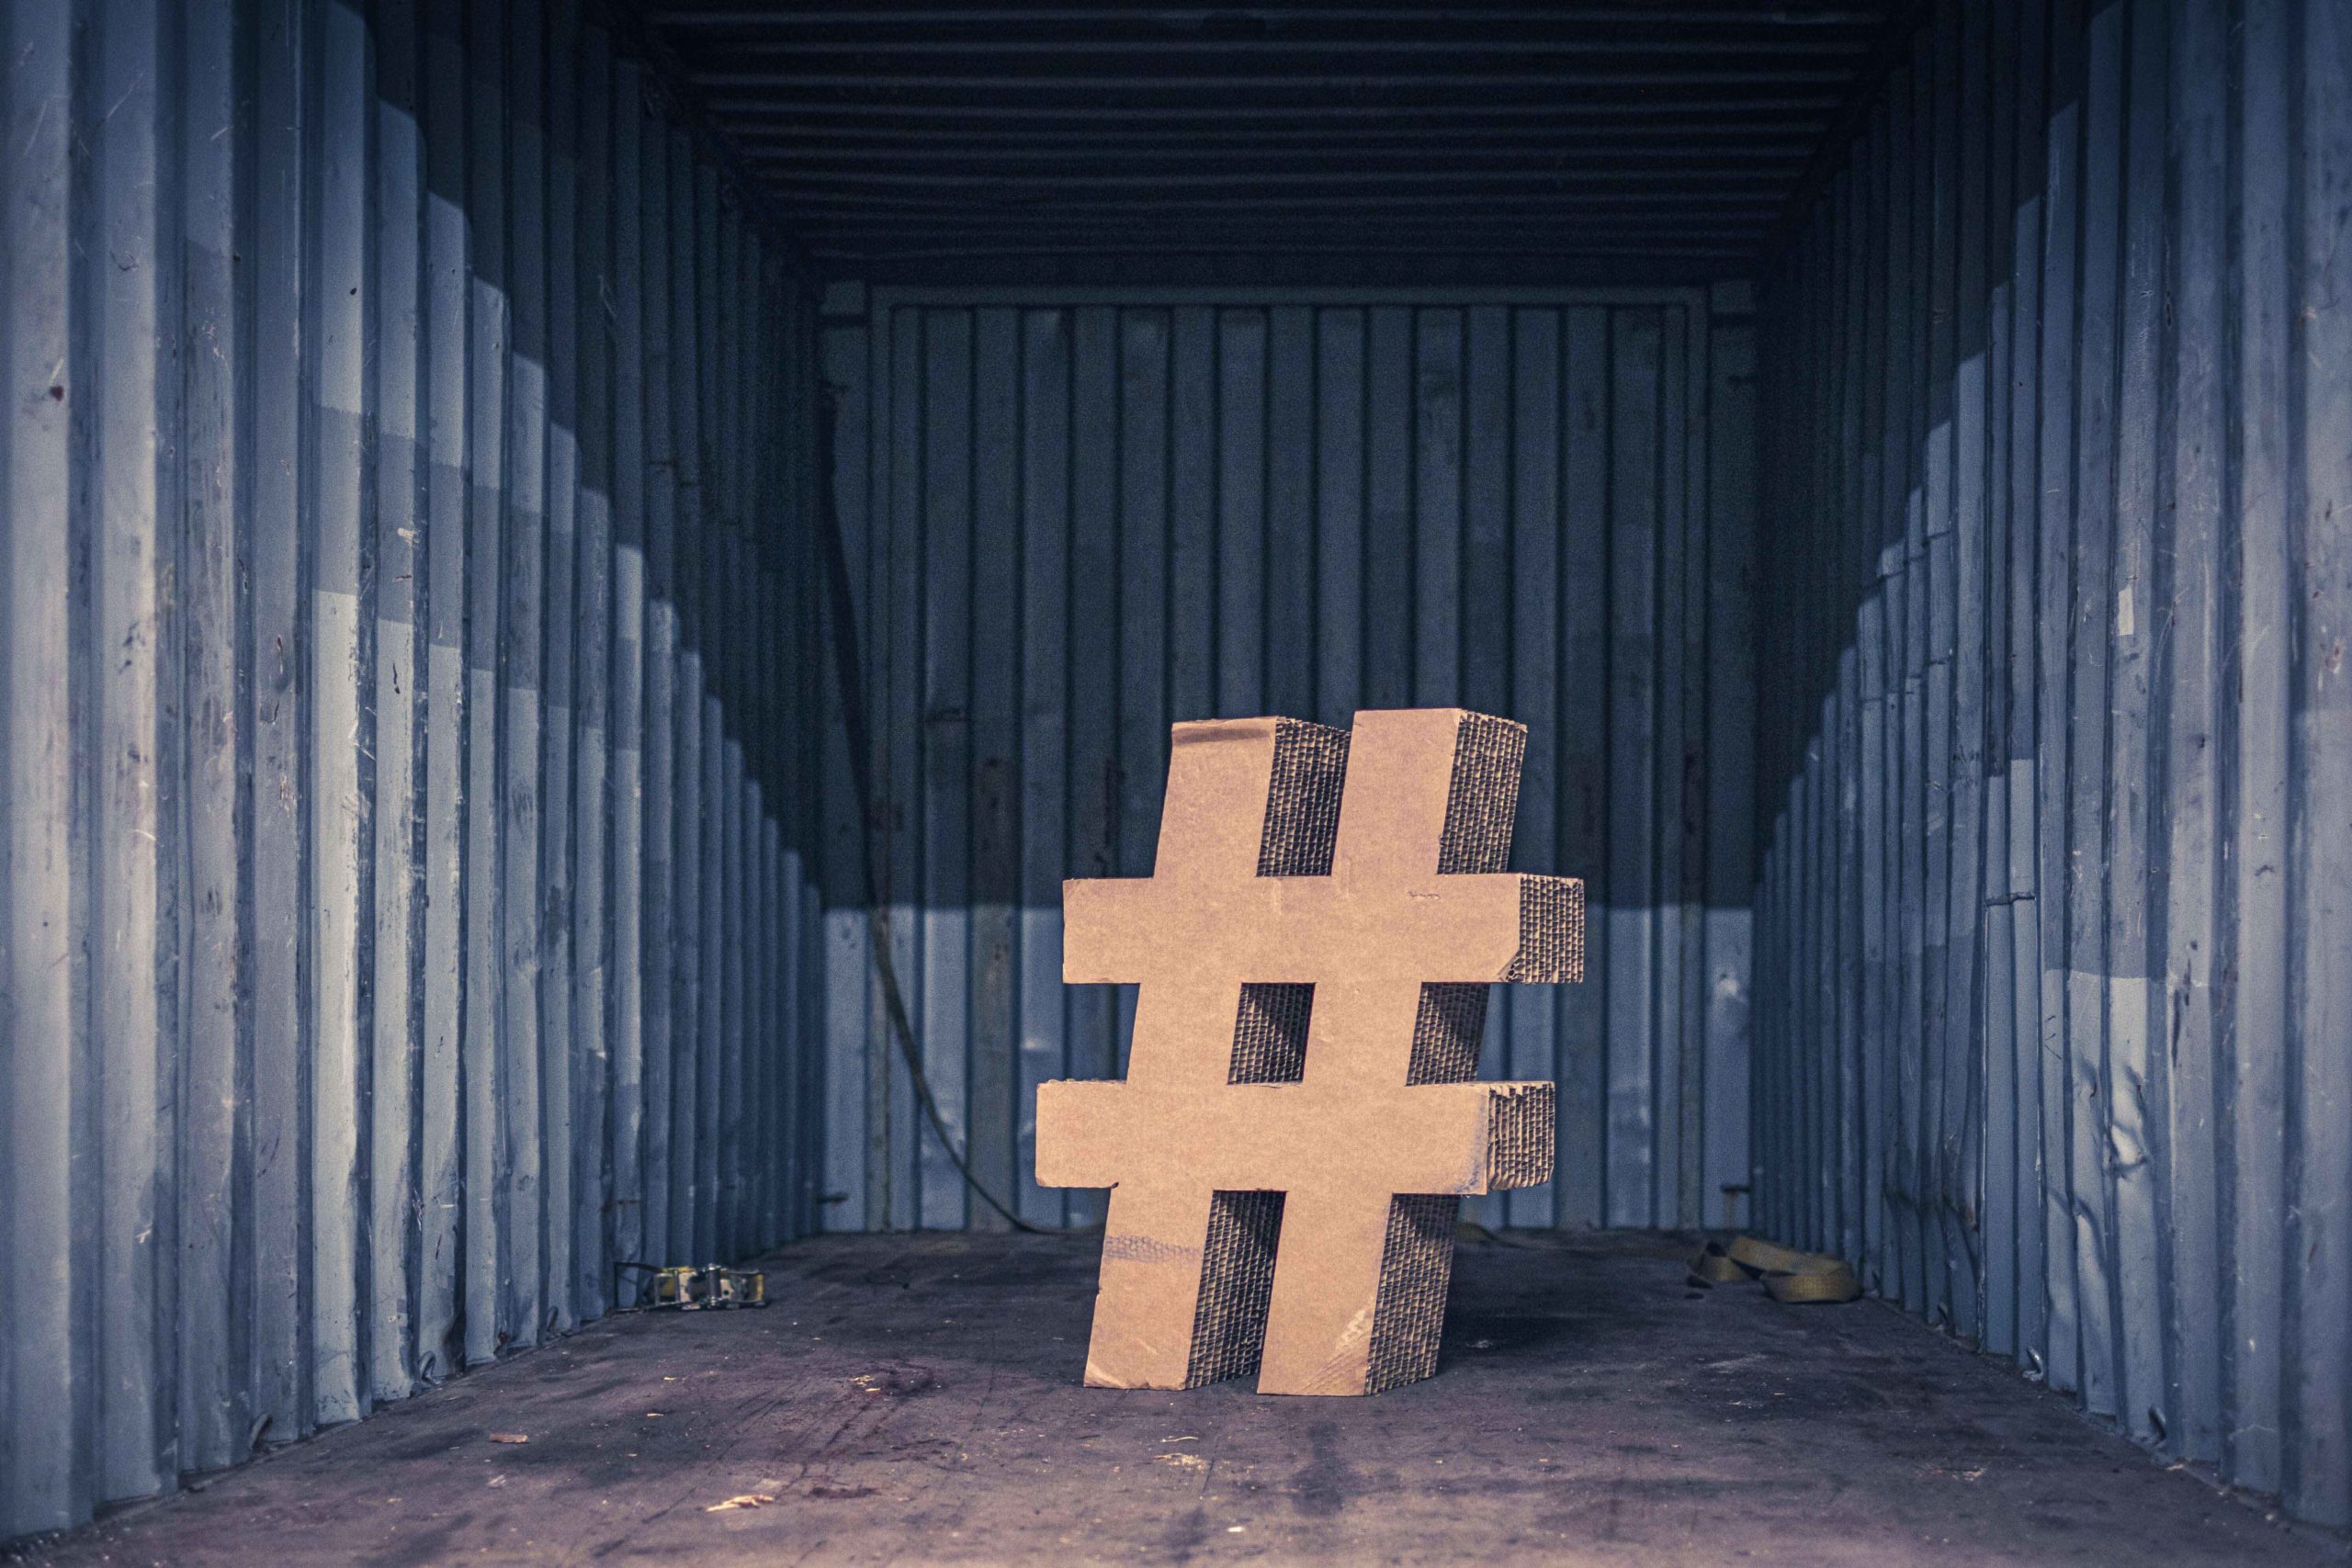 Do you know how to use #hashtags on Google+